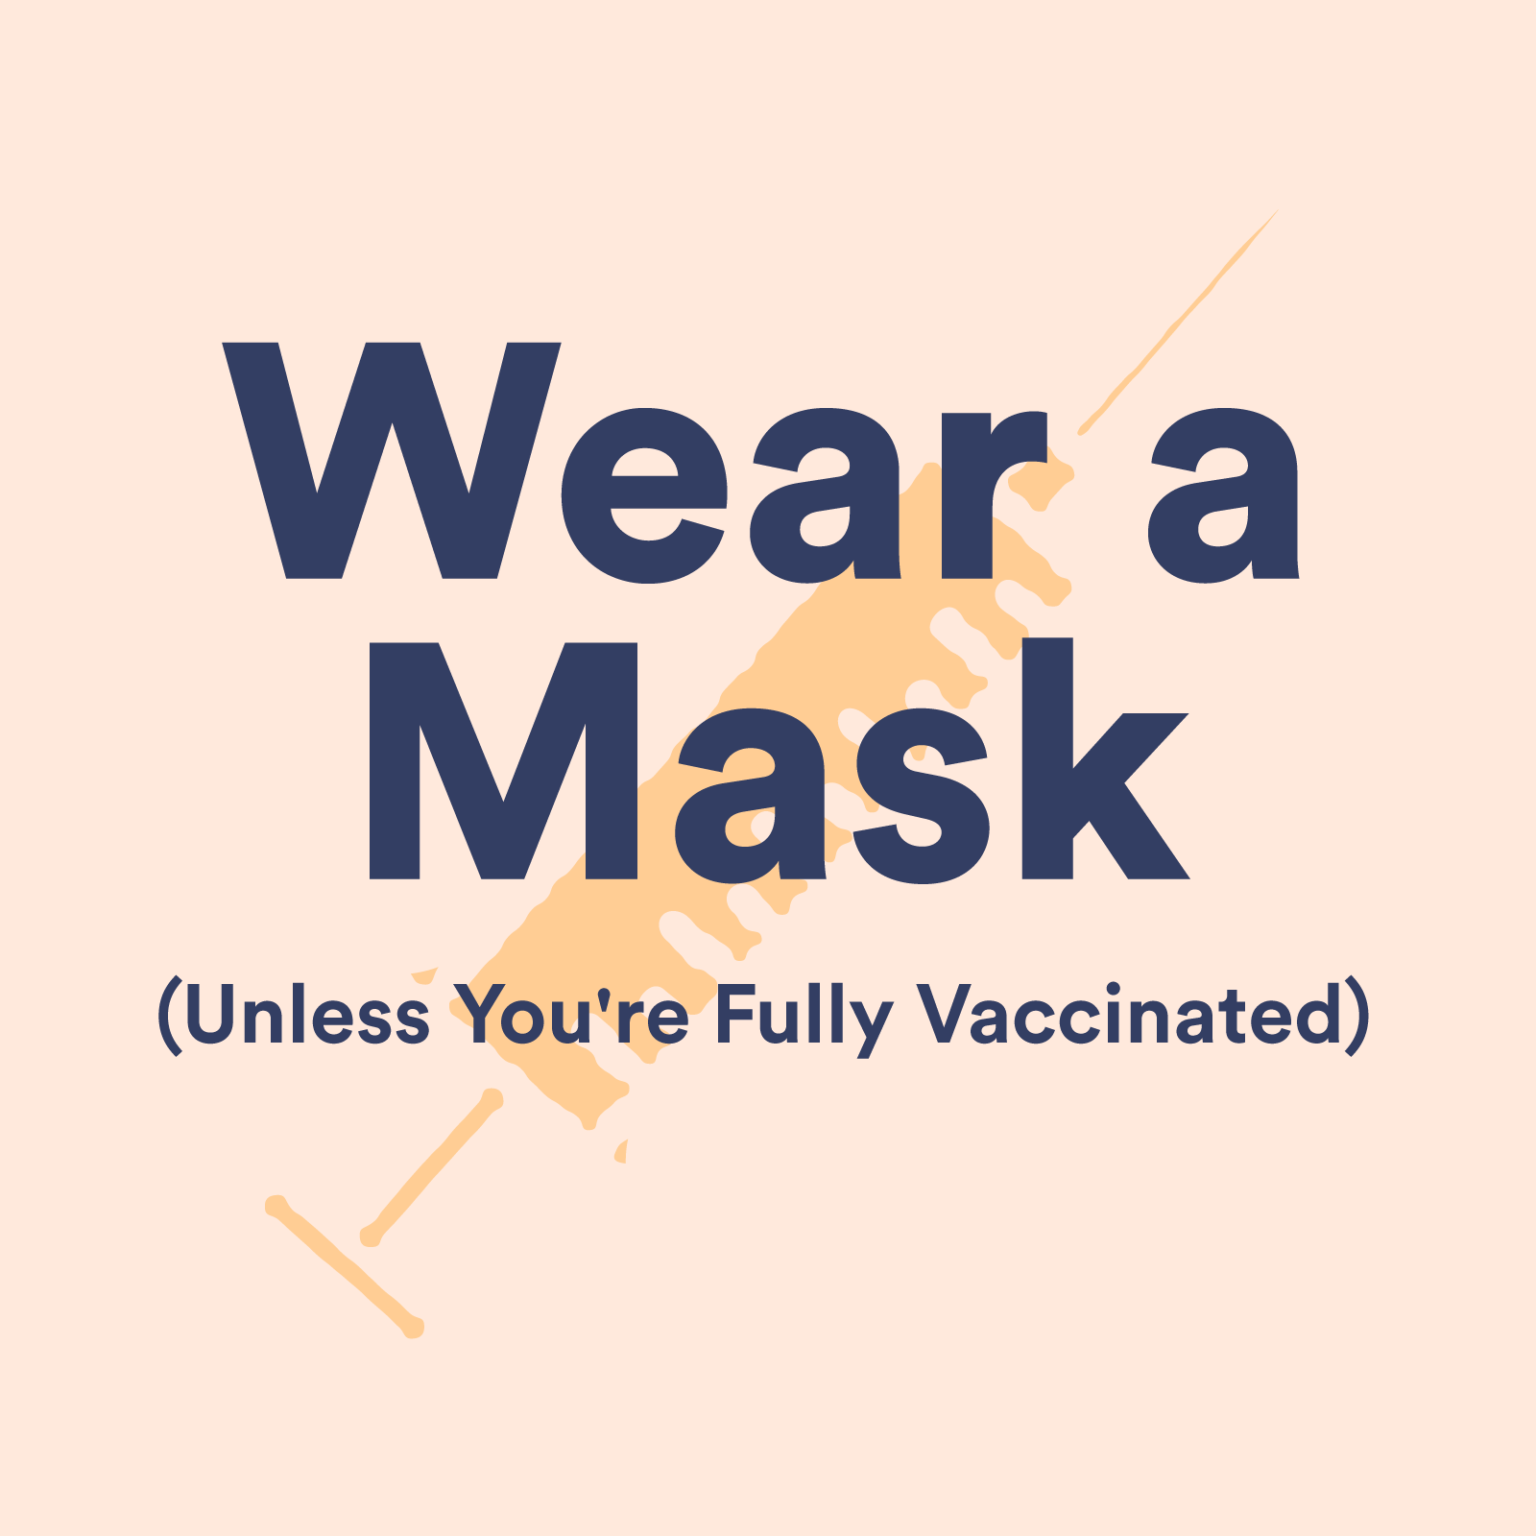 Free, Downloadable Vaccine and Face Mask Optional Signs for Small